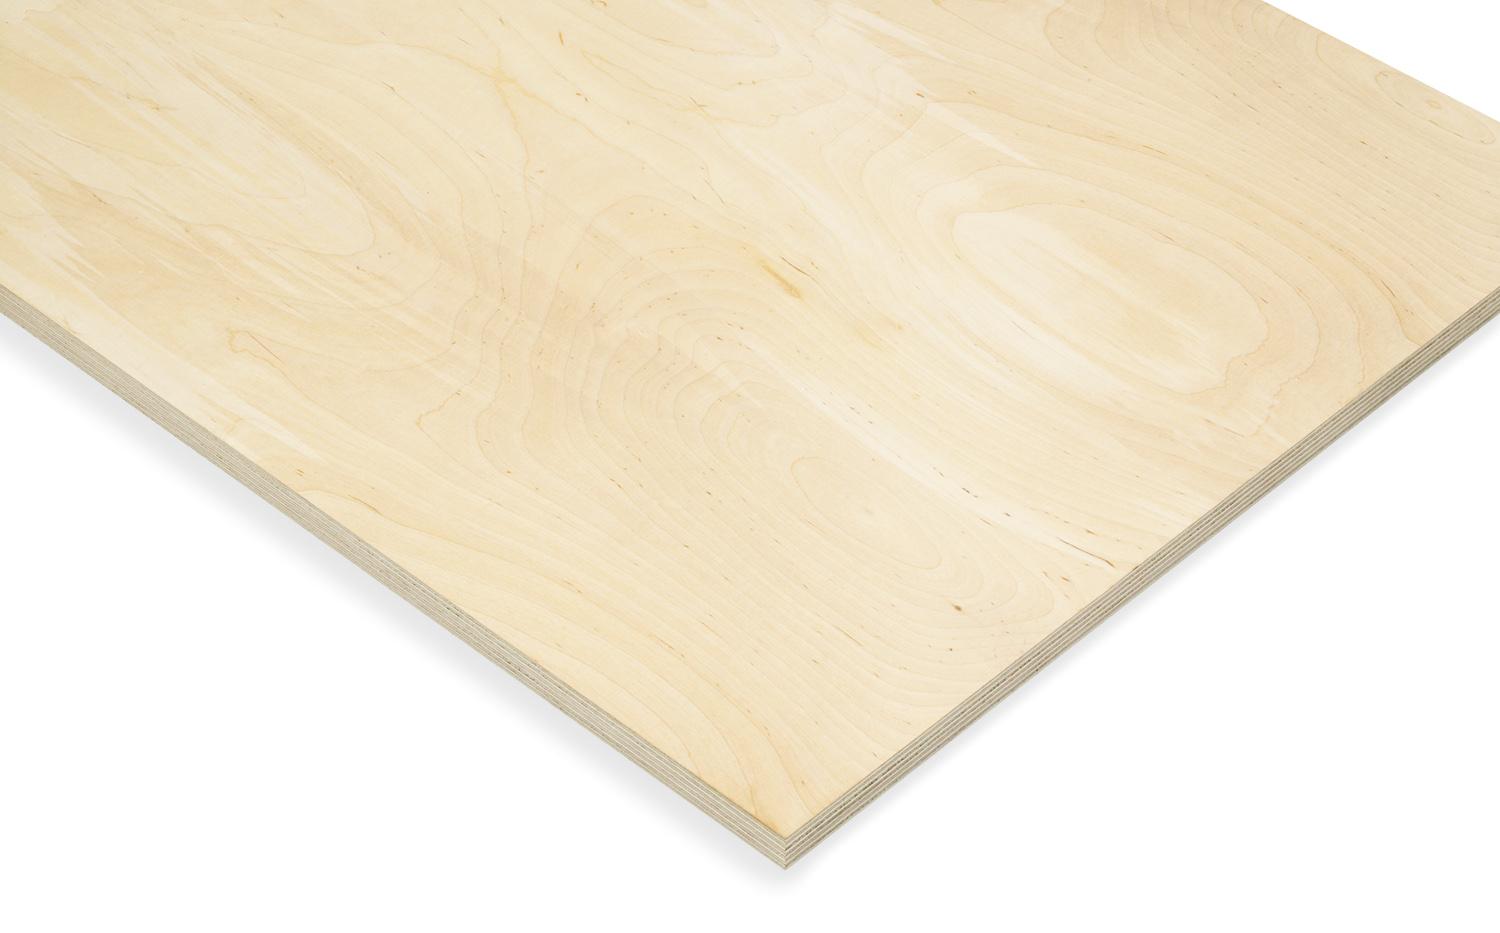 KoskiStandard uncoated Finnish birch plywood for multiple use.